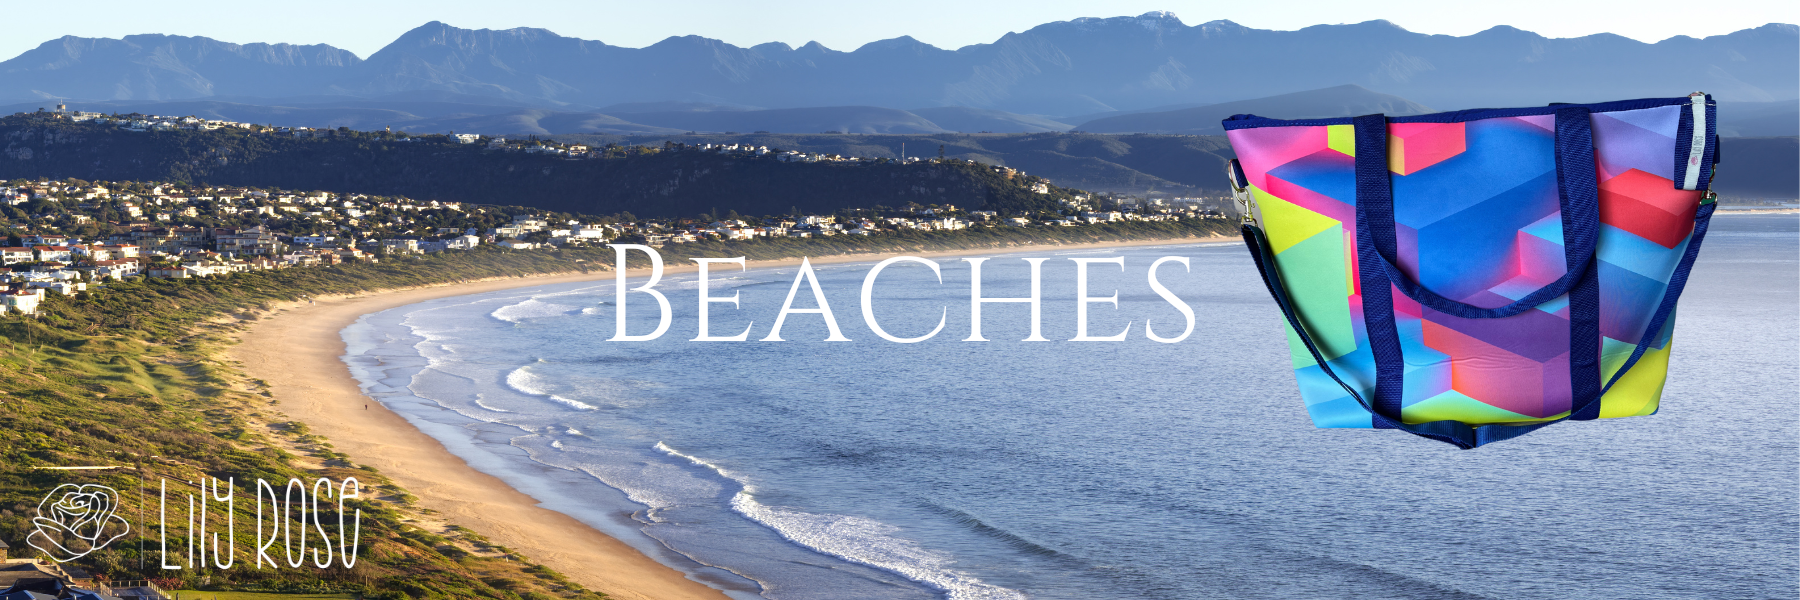 South African Beaches, Robberg Beach Plettenberg Bay, Lily Rose Collection Picnic Ideas and South African Tourism